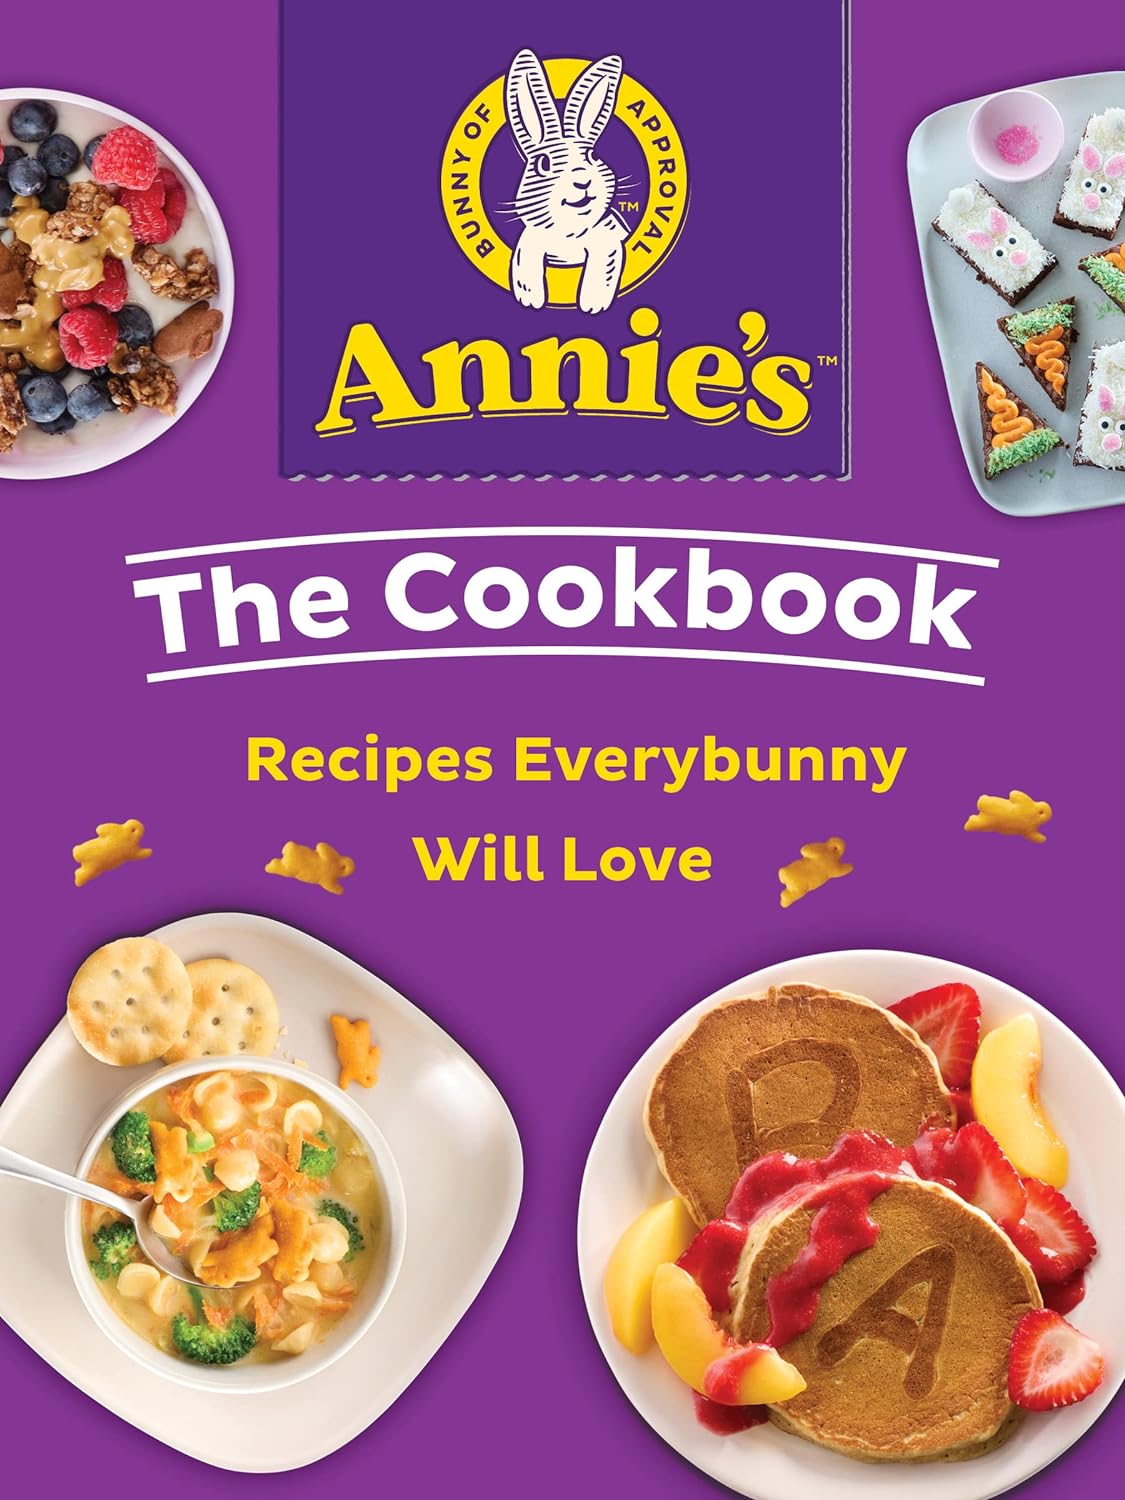 Annie's - Cooking Book - Everybunny Will Love